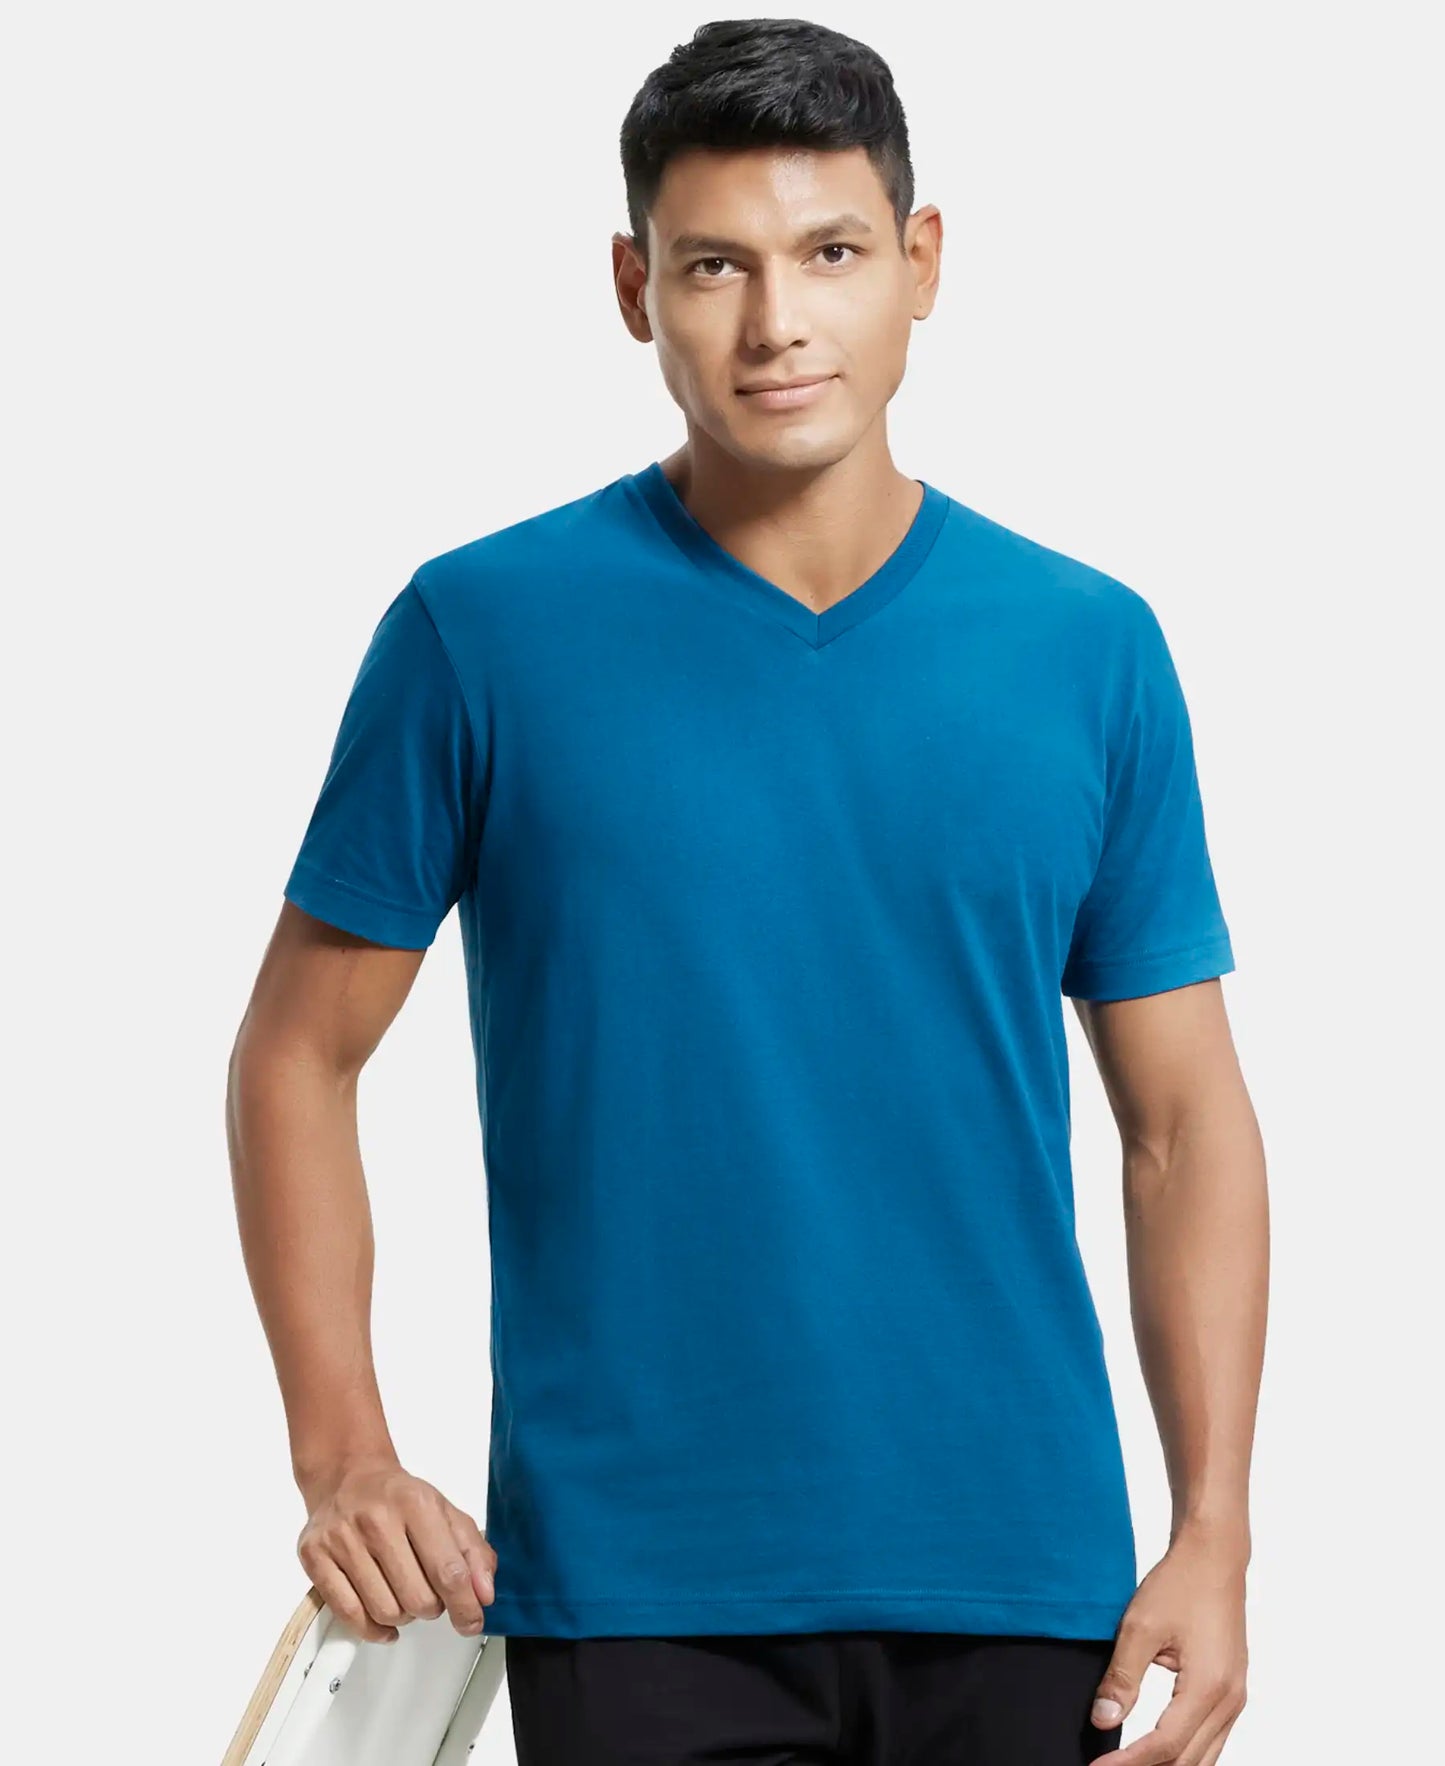 Super Combed Cotton Rich Solid V Neck Half Sleeve T-Shirt  - Seaport Teal-5